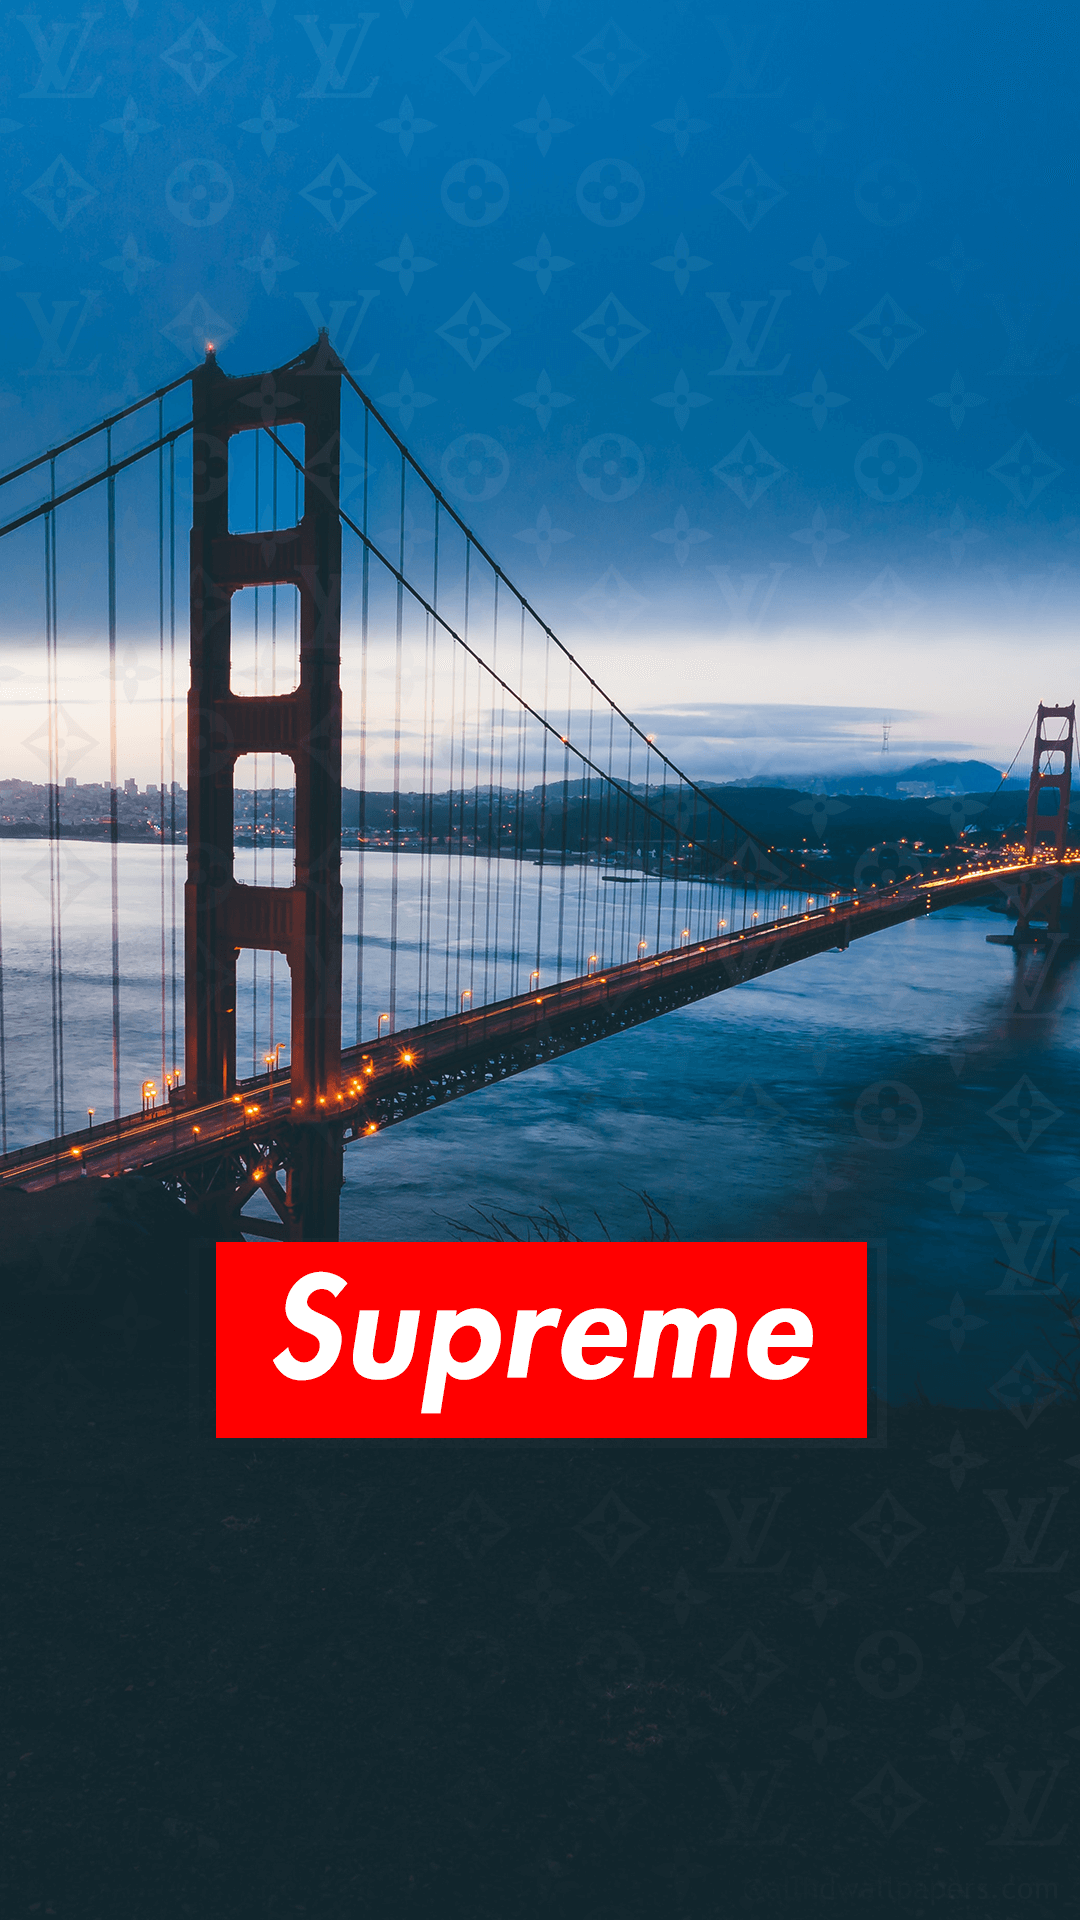 Free download 70 Supreme Wallpapers in 4K AllHDWallpapers 1080x1920